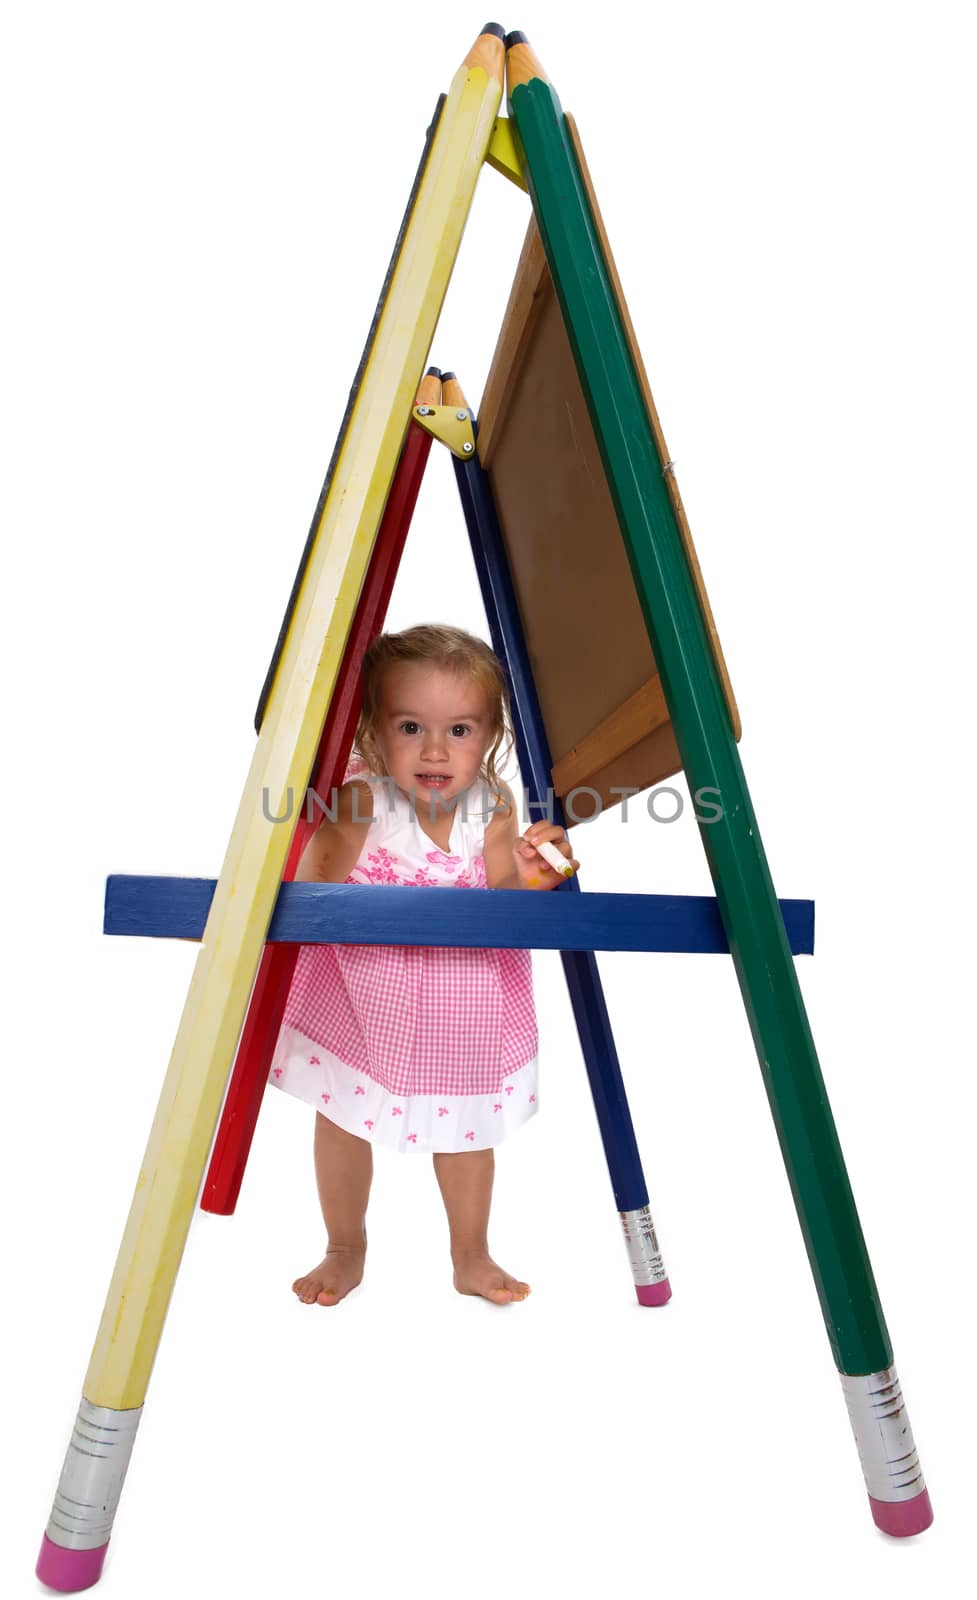 Cute little girl with bare feet playing on an A-frame signboard peering through underneath at the camera, isolated on white